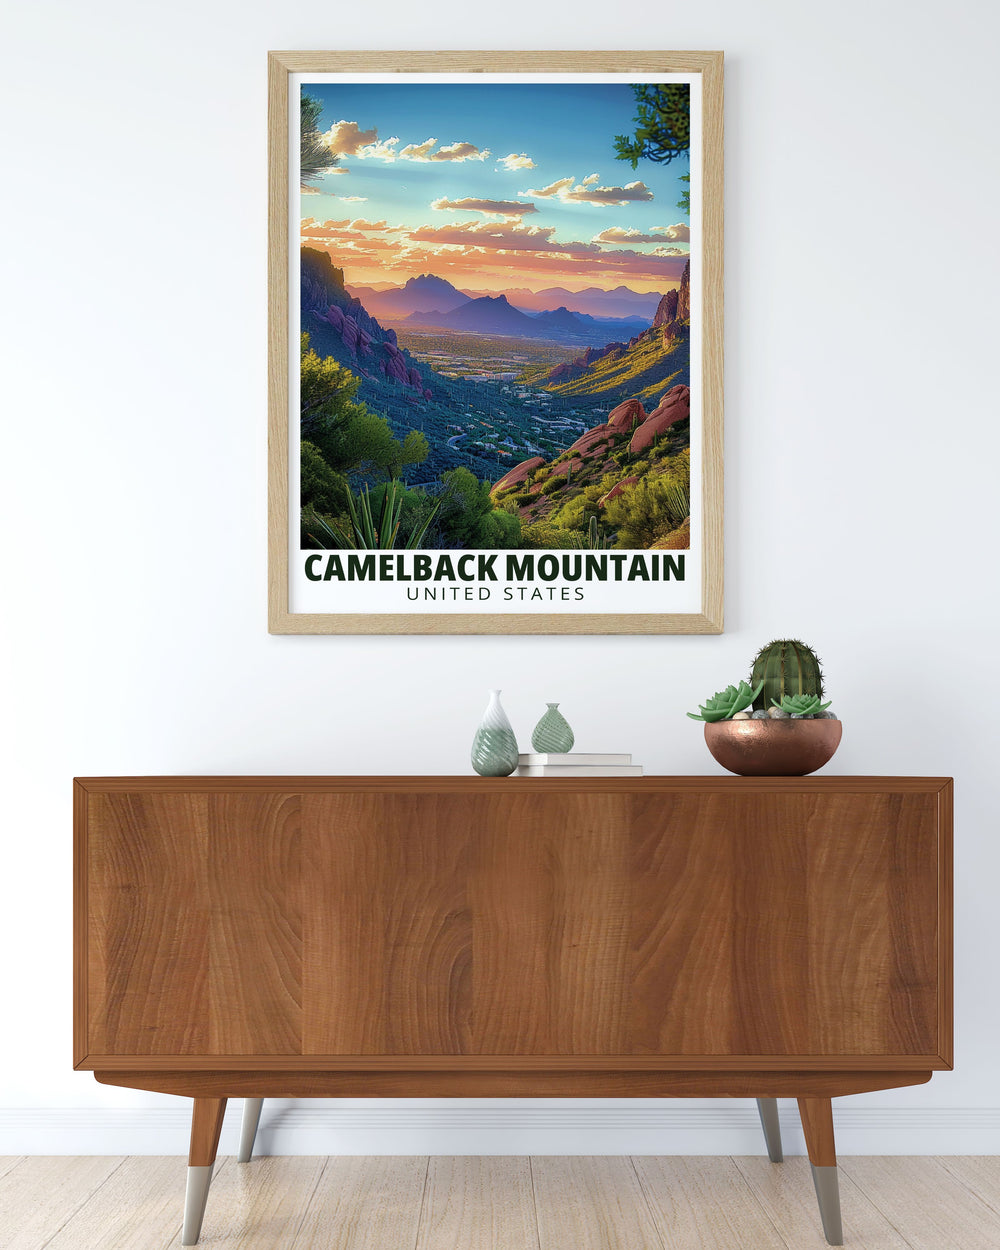 Experience the charm of Arizona with this Summit View travel poster featuring the majestic Mt. Camelback. This Arizona poster is a perfect addition to any home or office decor offering a piece of the beautiful Arizona scenery to enhance your living space.